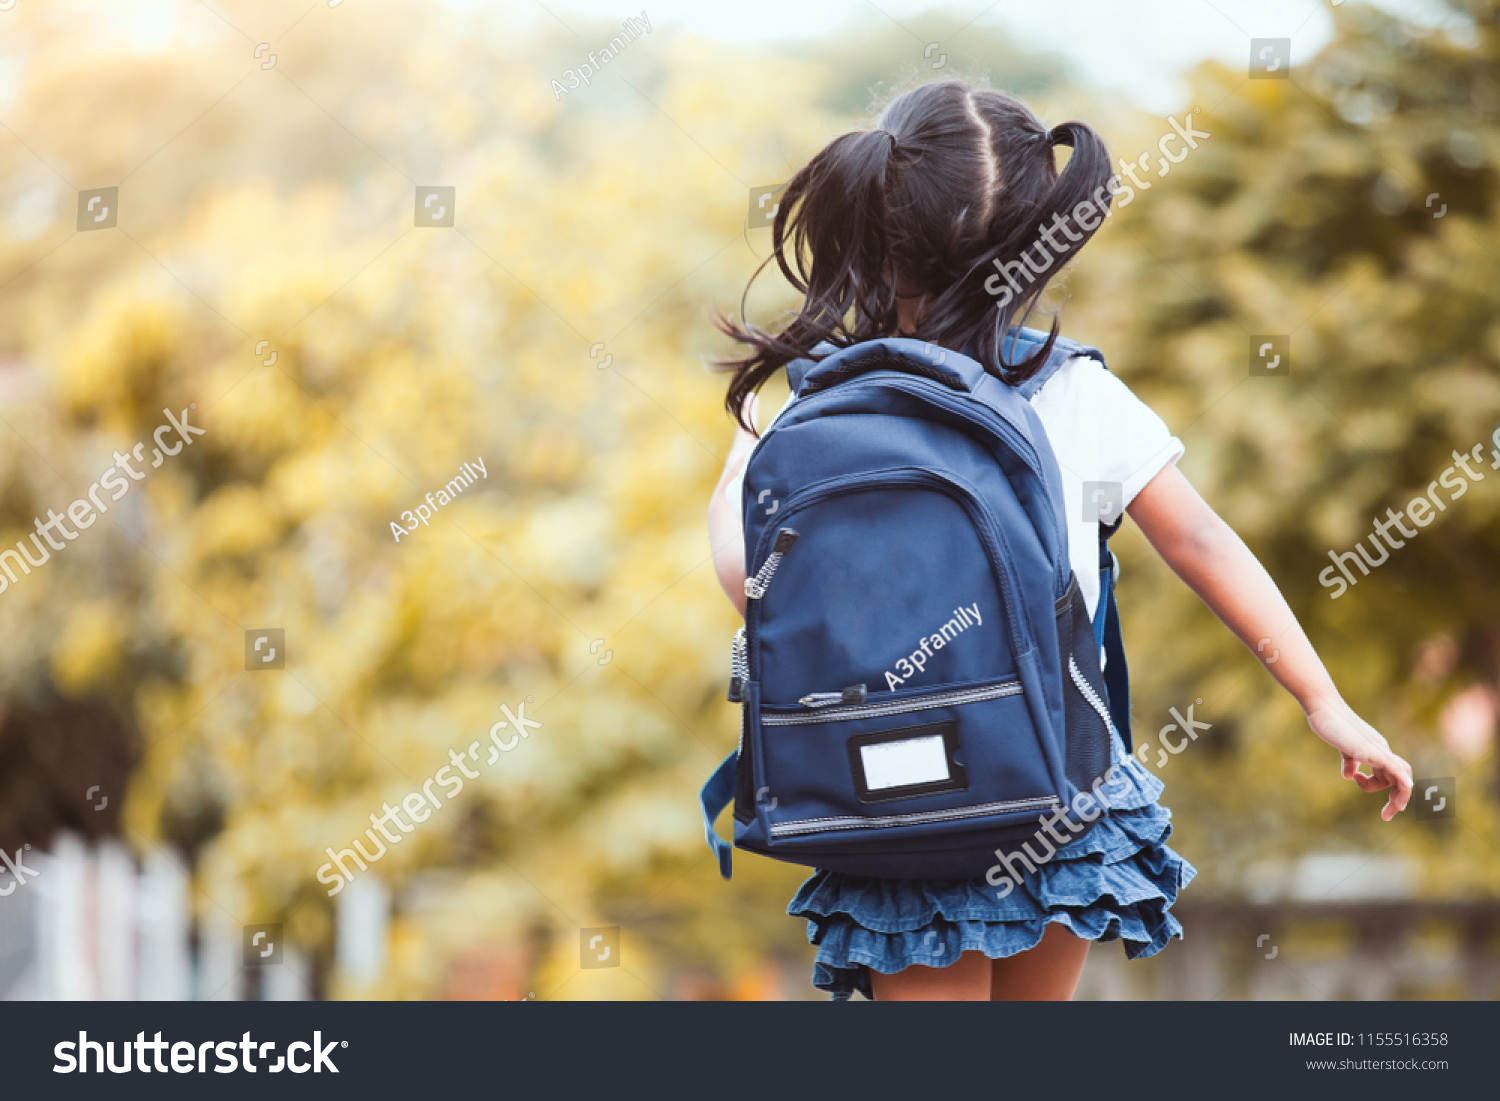 Back to school. Cute asian child girl with backpack running and going to school with fun #1155516358